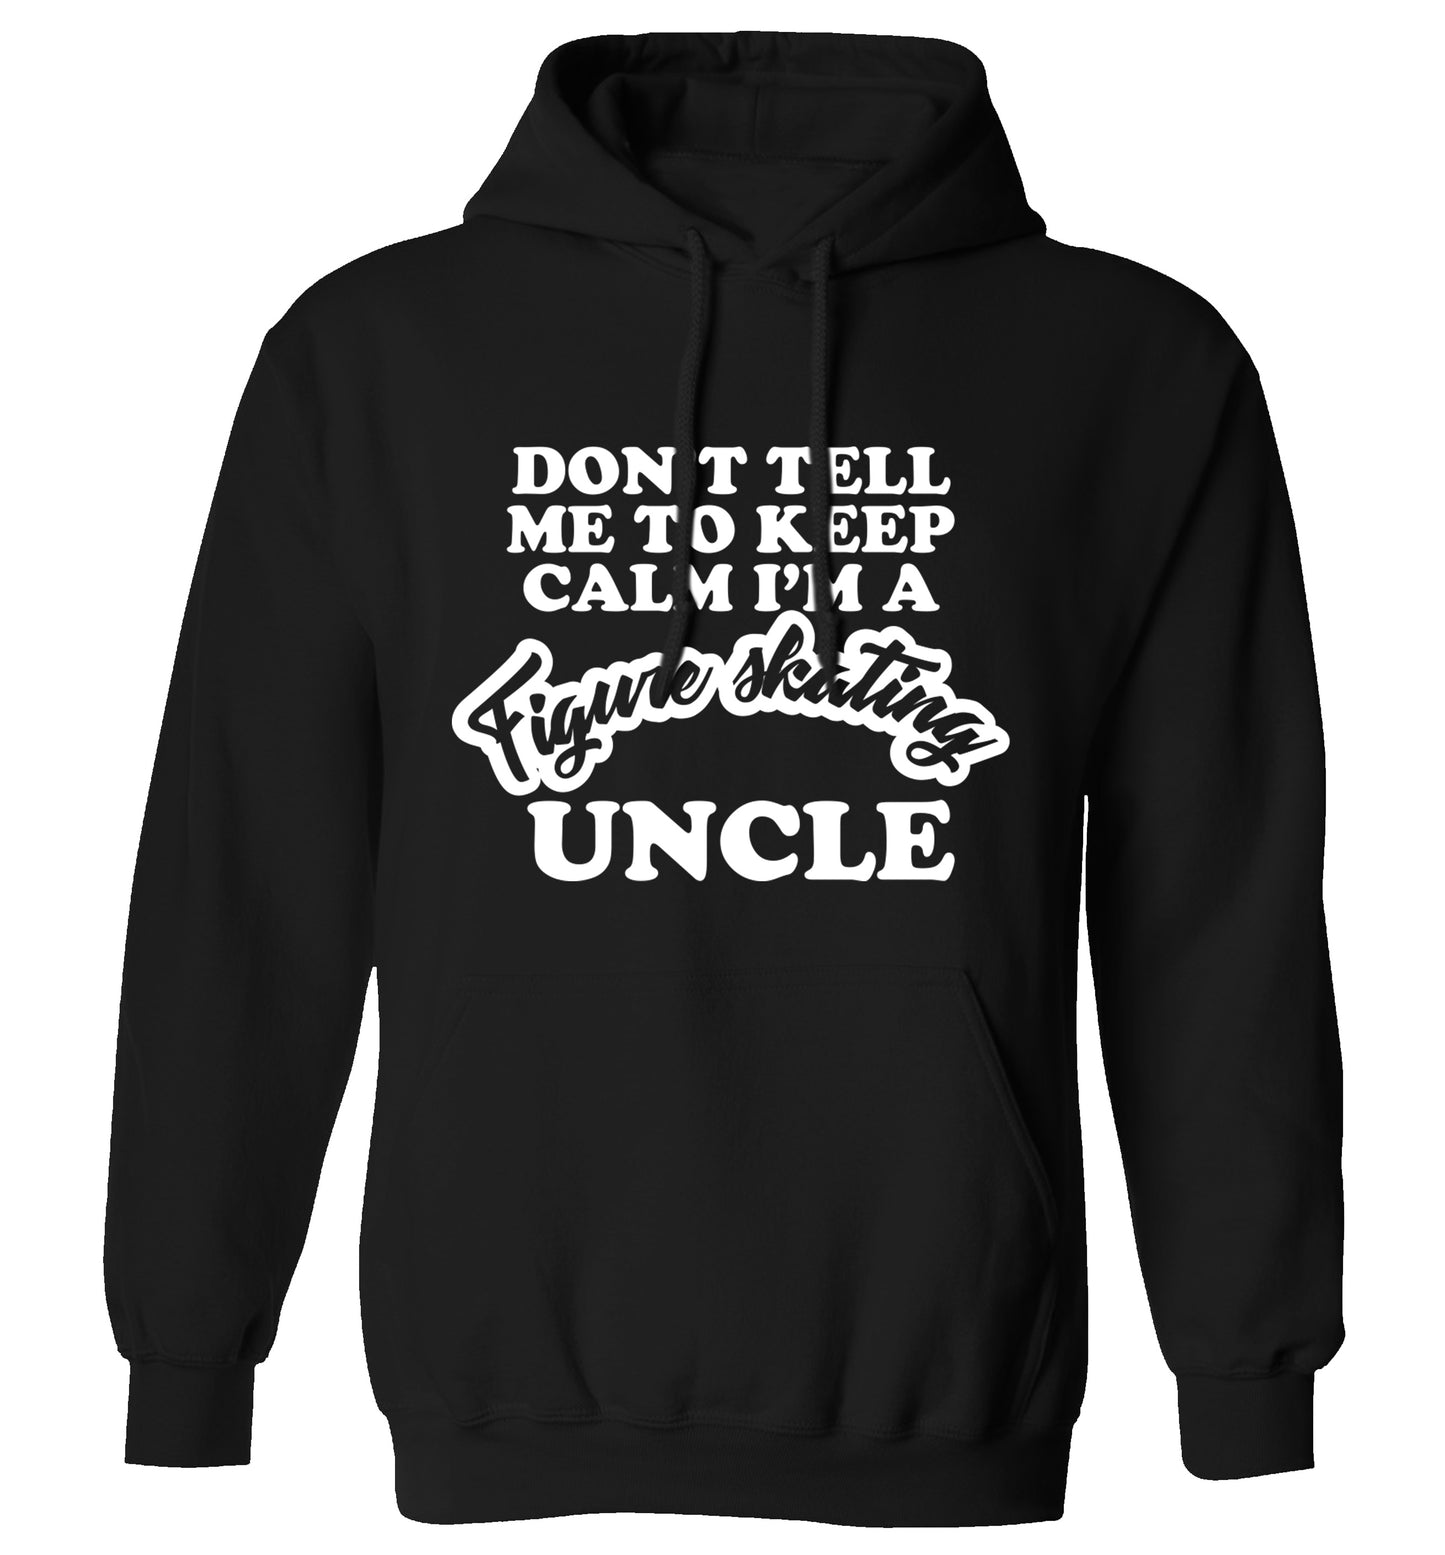 Don't tell me to keep calm I'm a figure skating uncle adults unisexblack hoodie 2XL